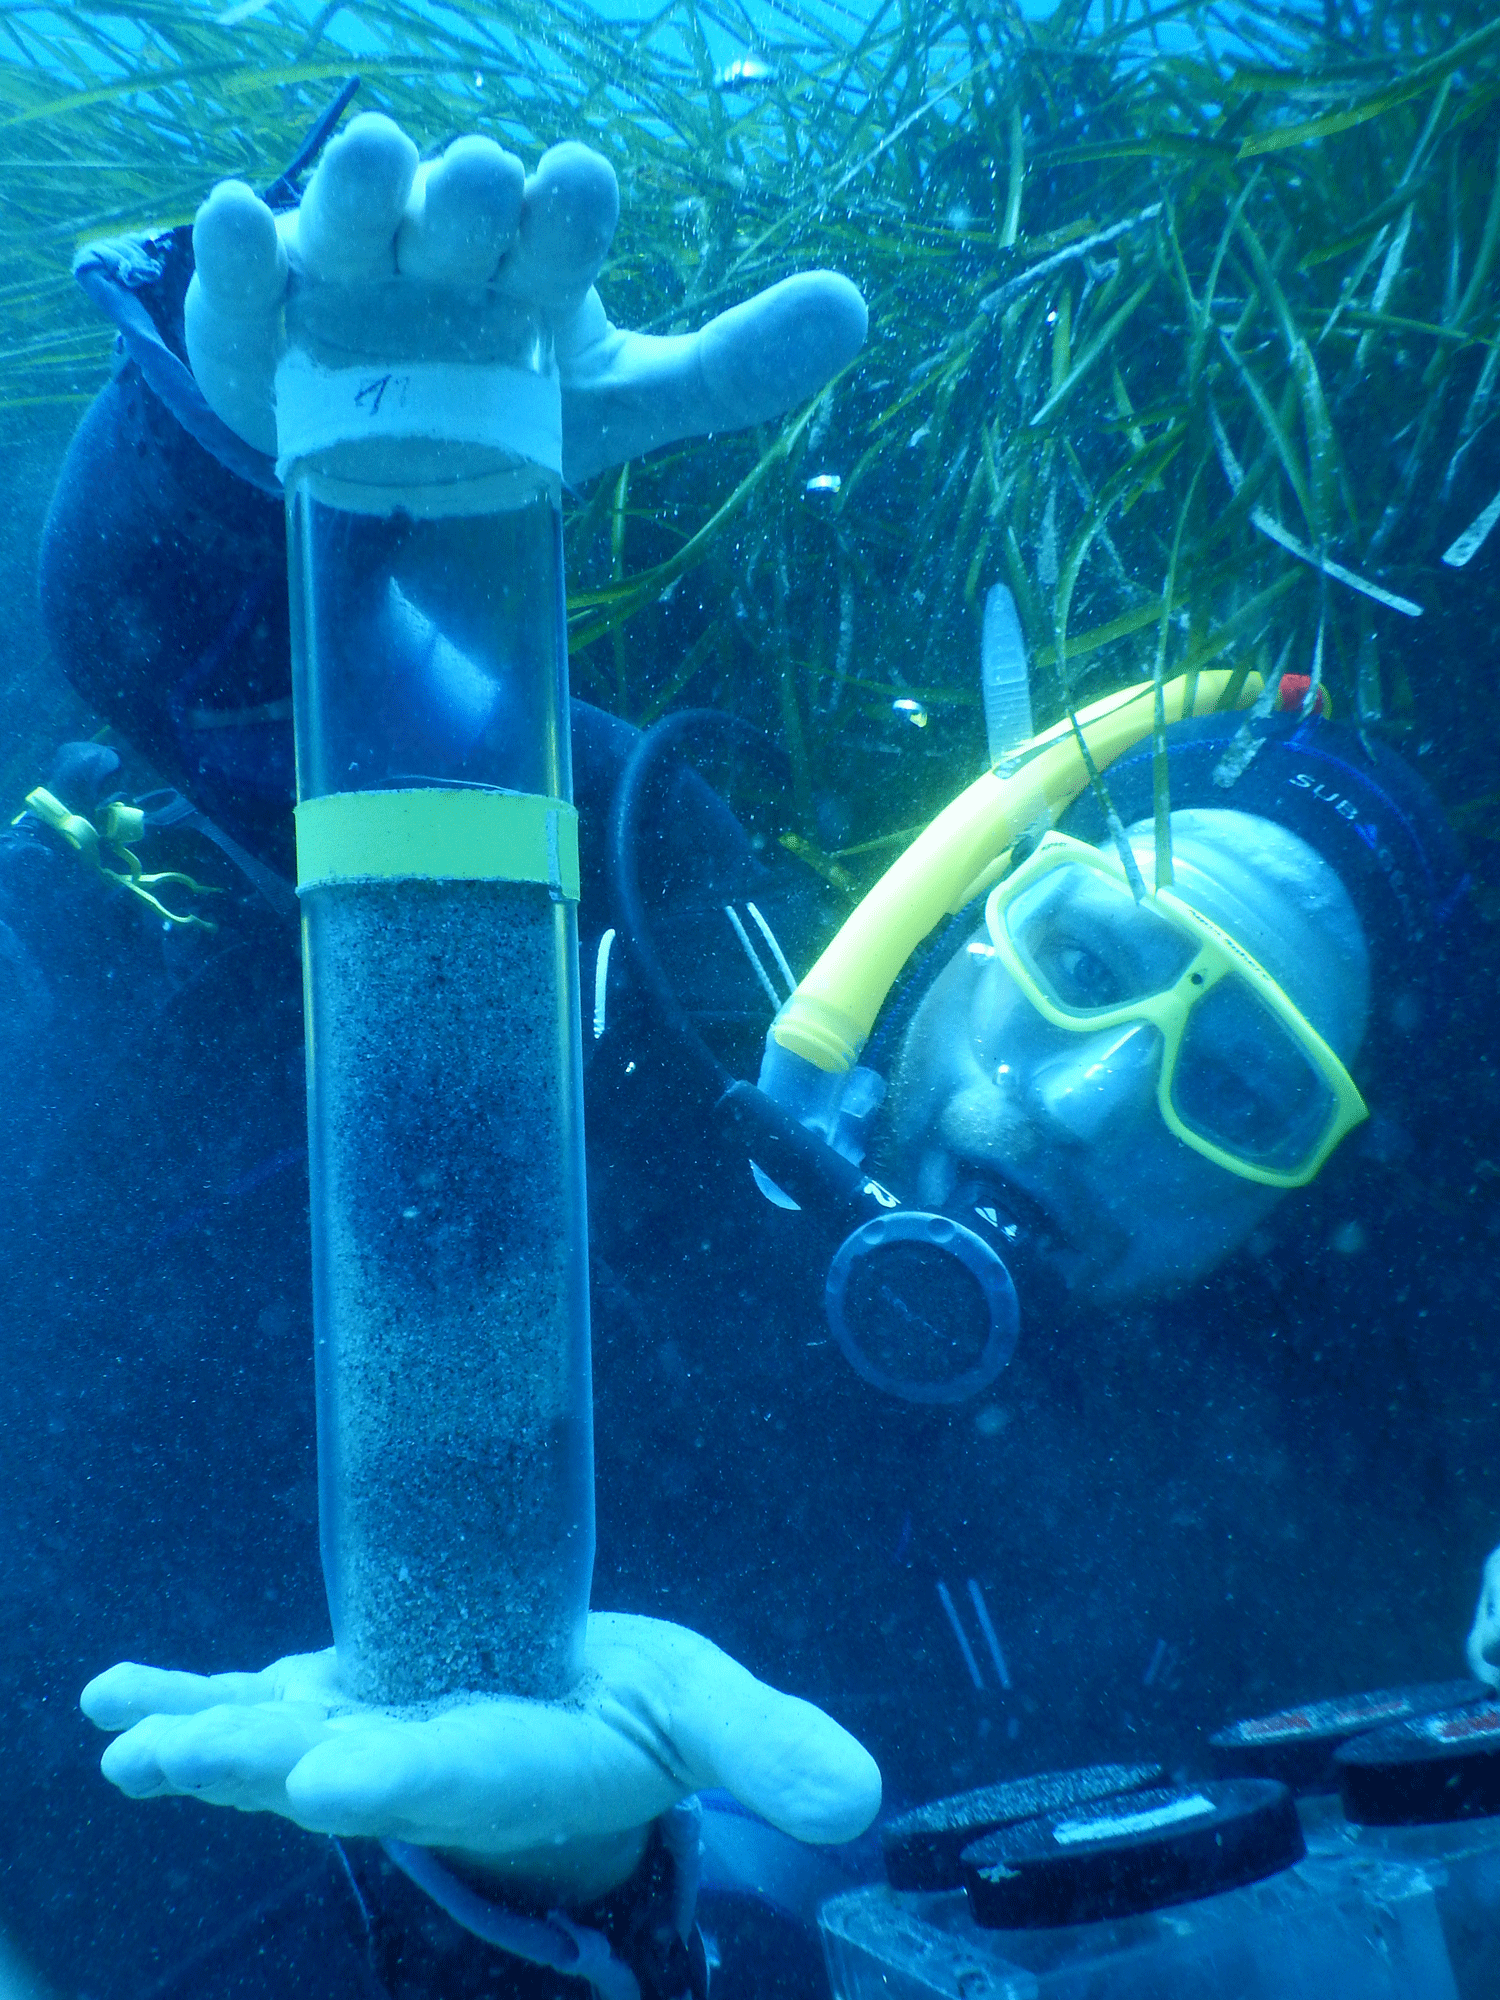 Harald Gruber-Vodicka from the Max Planck Institute in Bremen in the field nearby the seabed in which Paracatenula lives with its bacterial symbionts. The researchers collect such sediment cores in sea grass meadows off the Mediterranean island of Elba. © Manuel Kleiner